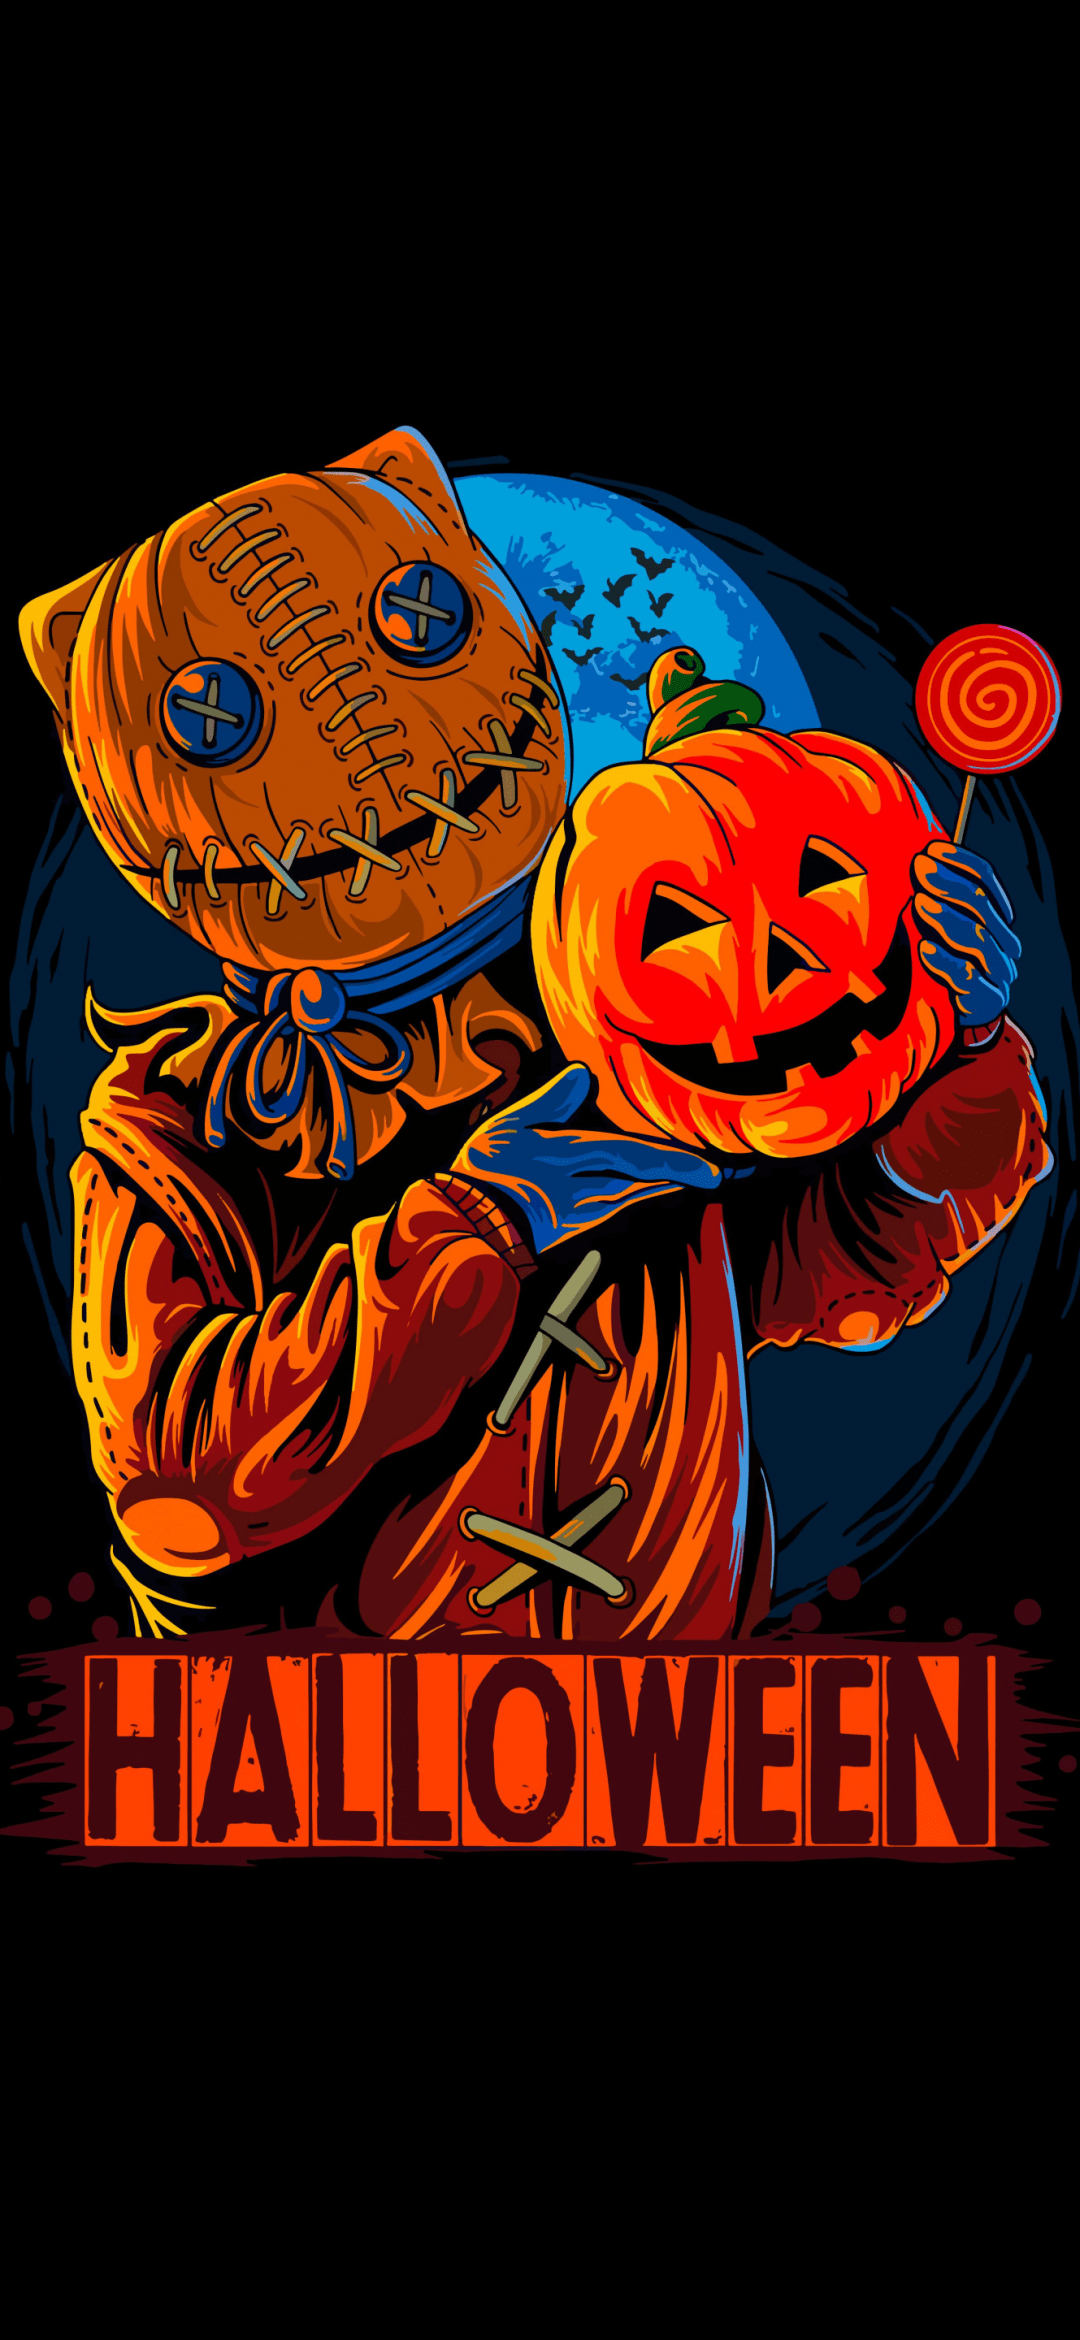 Scary pumpkin man holding a pumpkin with a moon in the background - Horror, Halloween